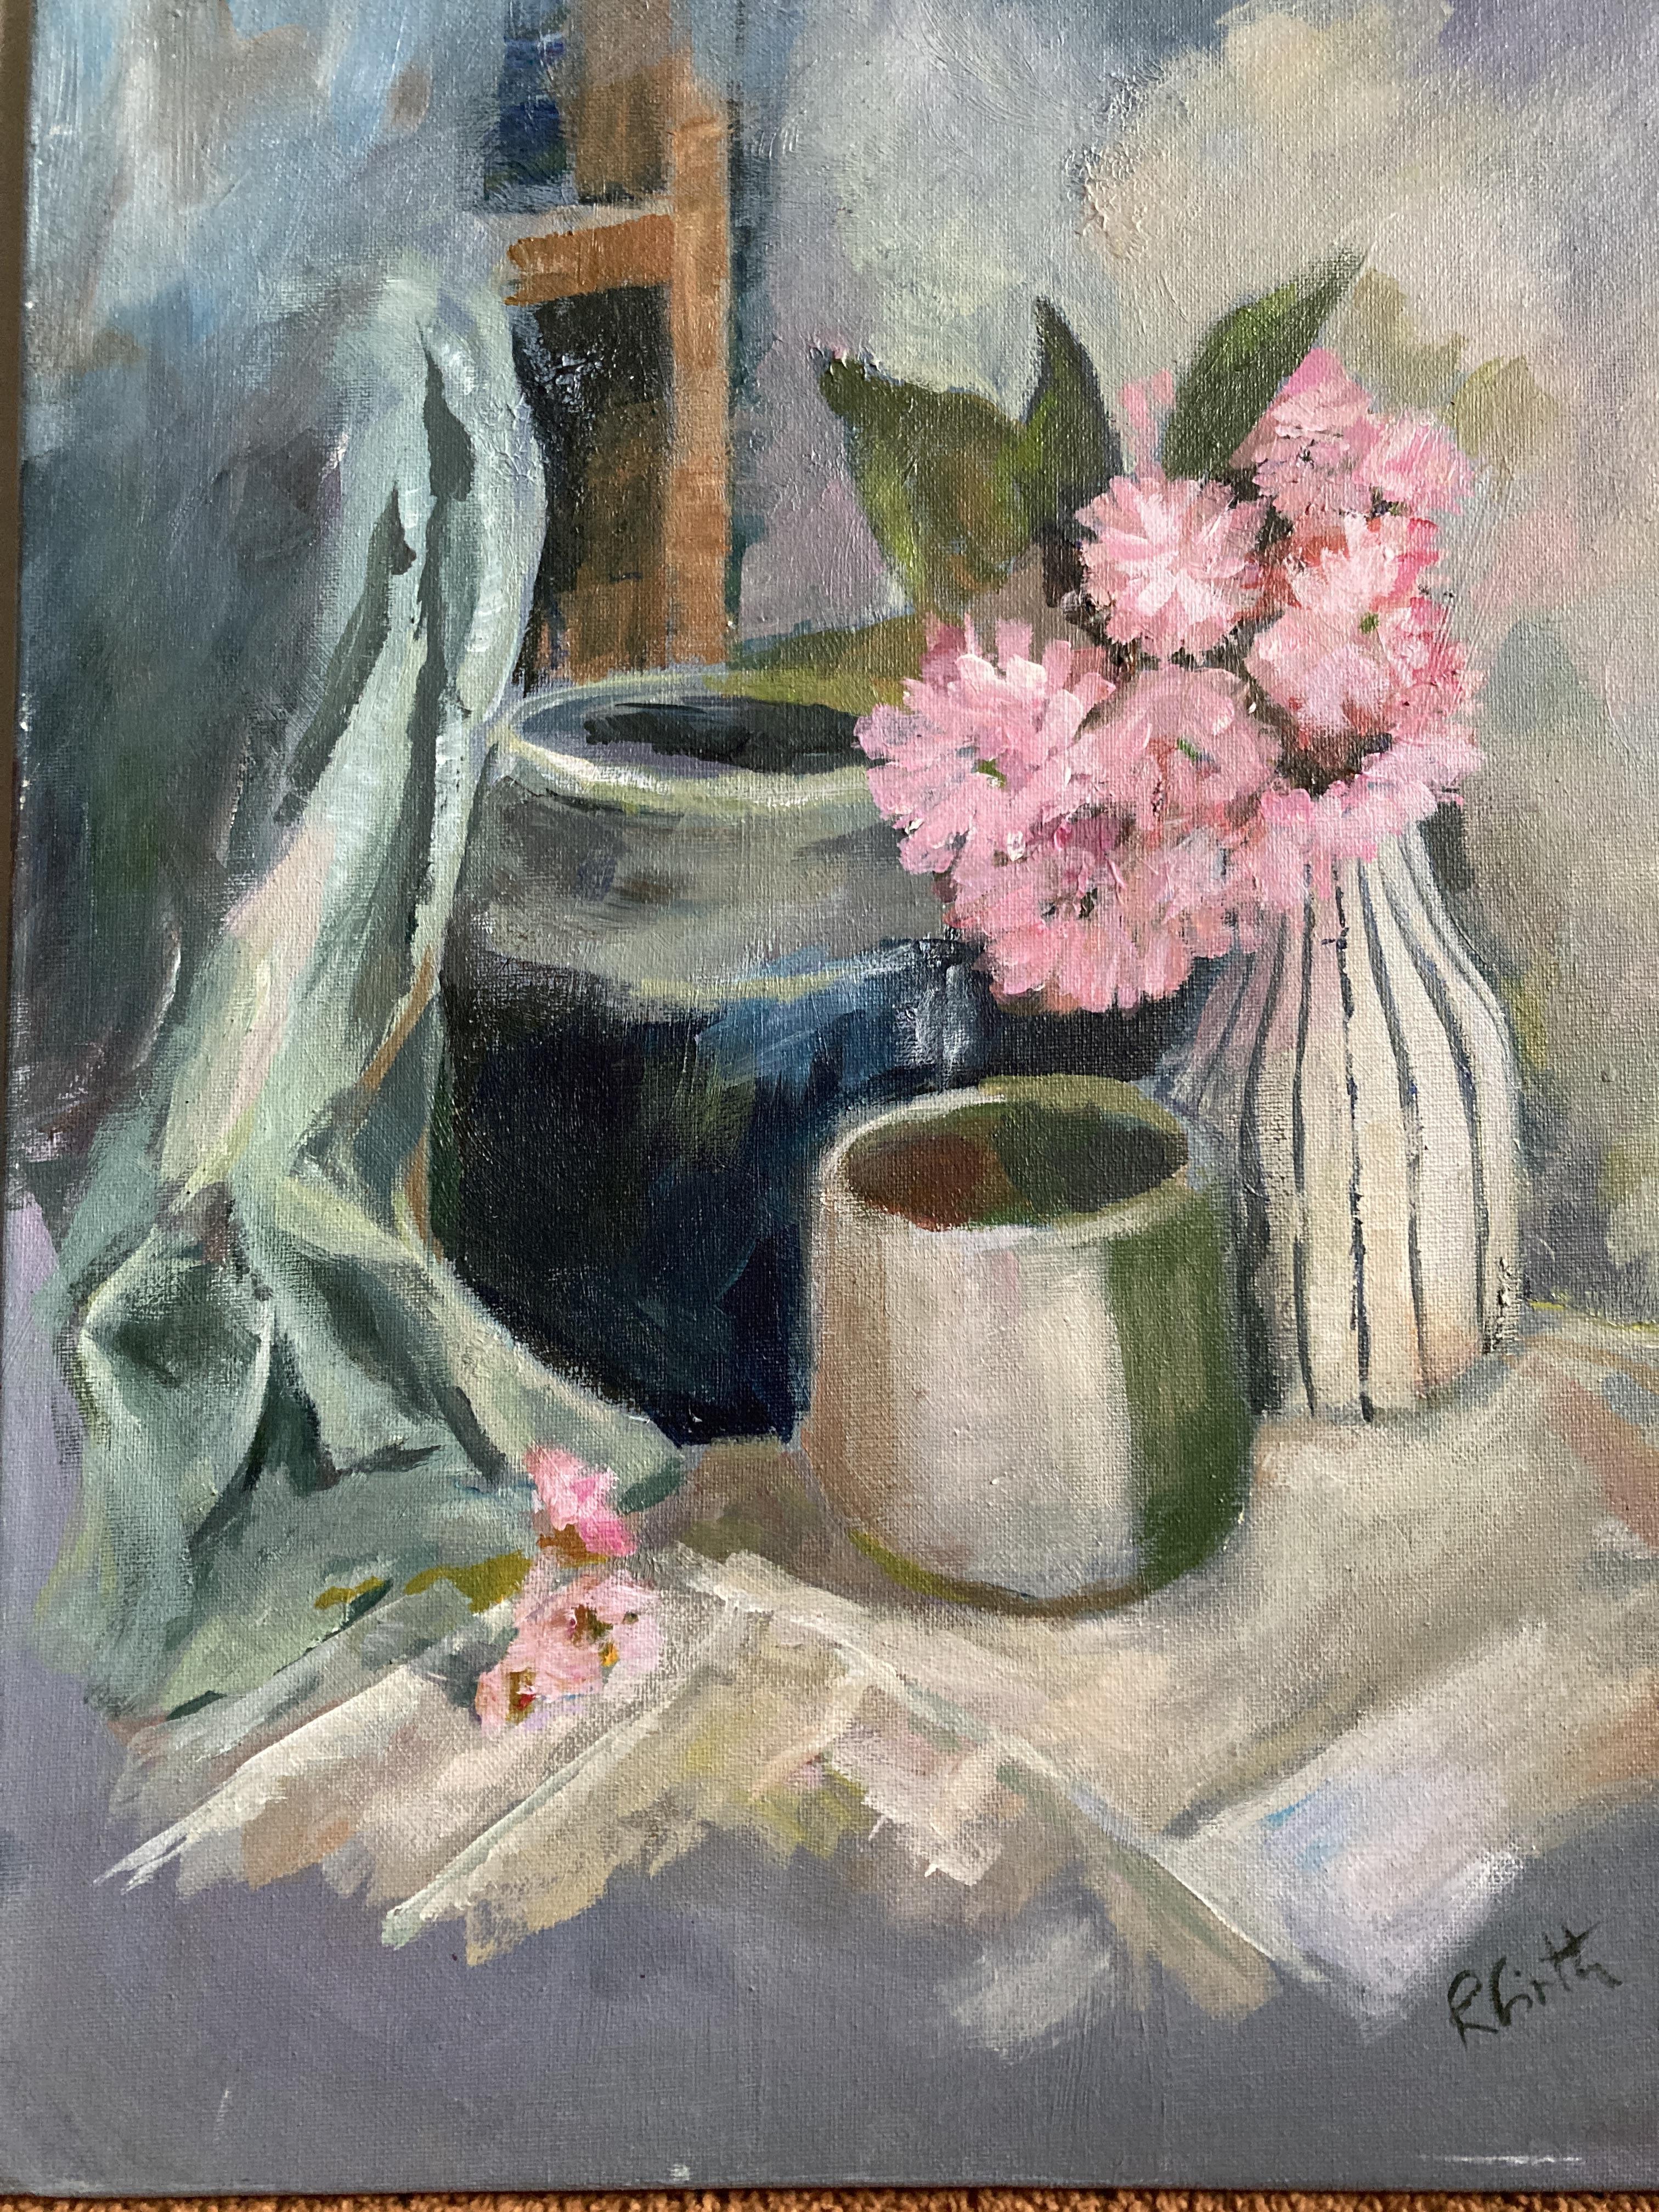 Rosemary Firth, "Still life with pink flowers", acrylic, 60 x 40cm, c. 2021. UK shipping £35.